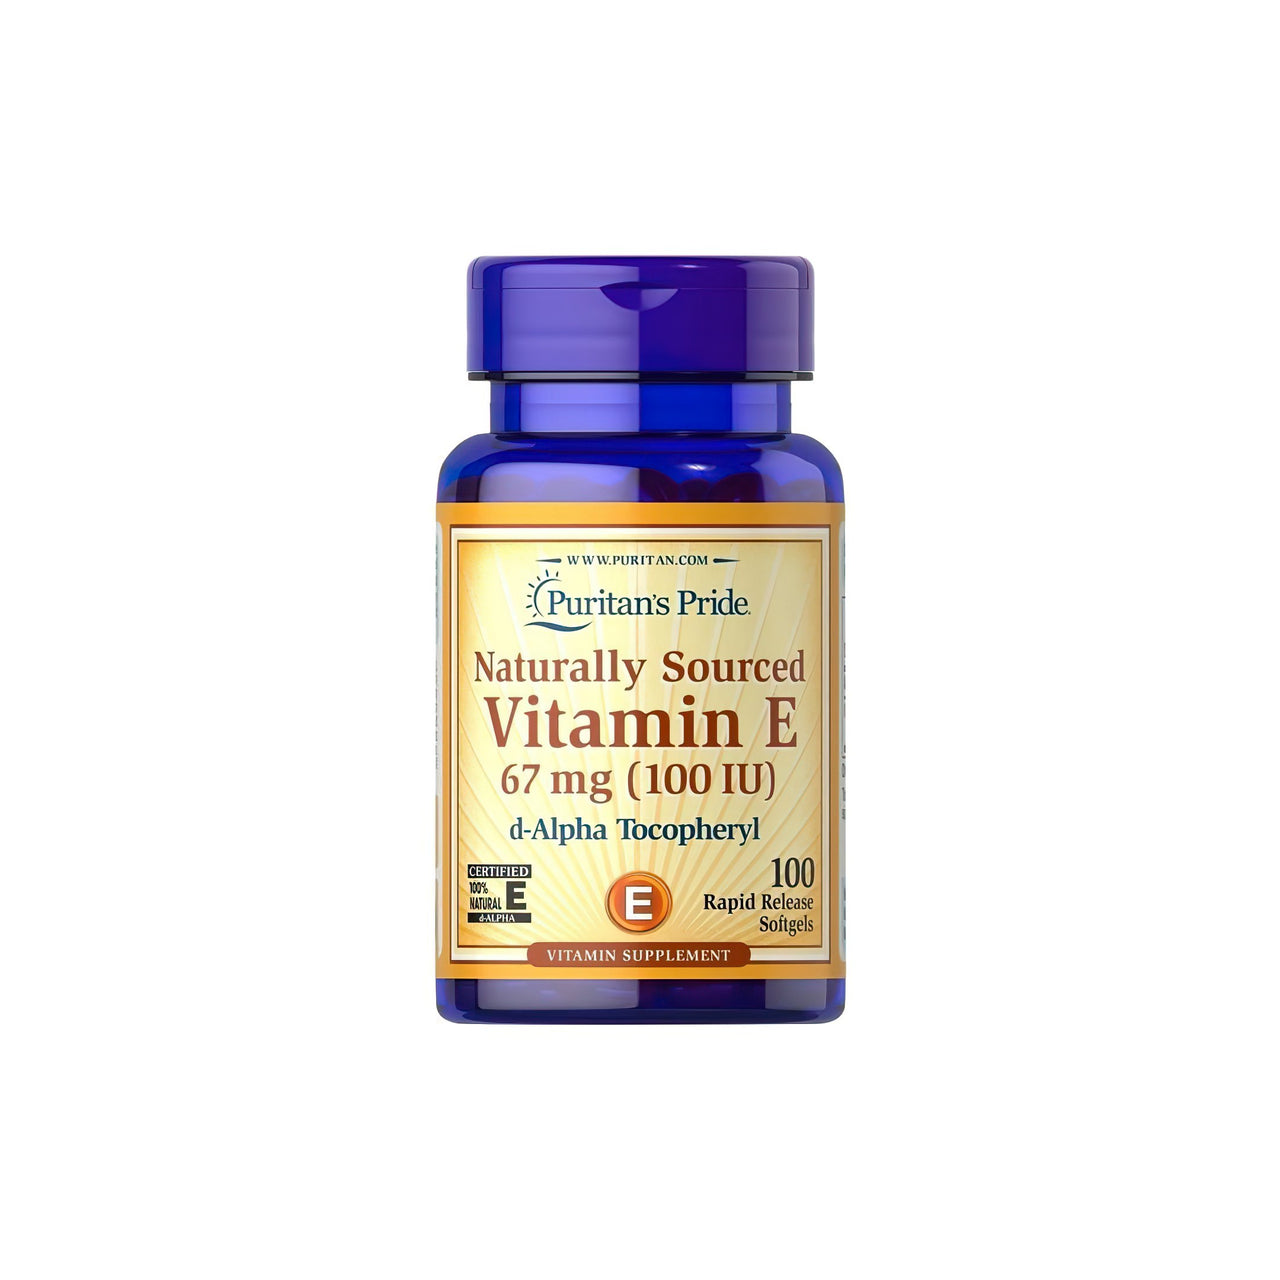 A bottle of Puritan's Pride Vitamin E 100 IU D-Alpha Tocopherol 100% Naturally 100 Rapid Release Softgels, a powerful antioxidant for cardiovascular health, against a crisp white background.